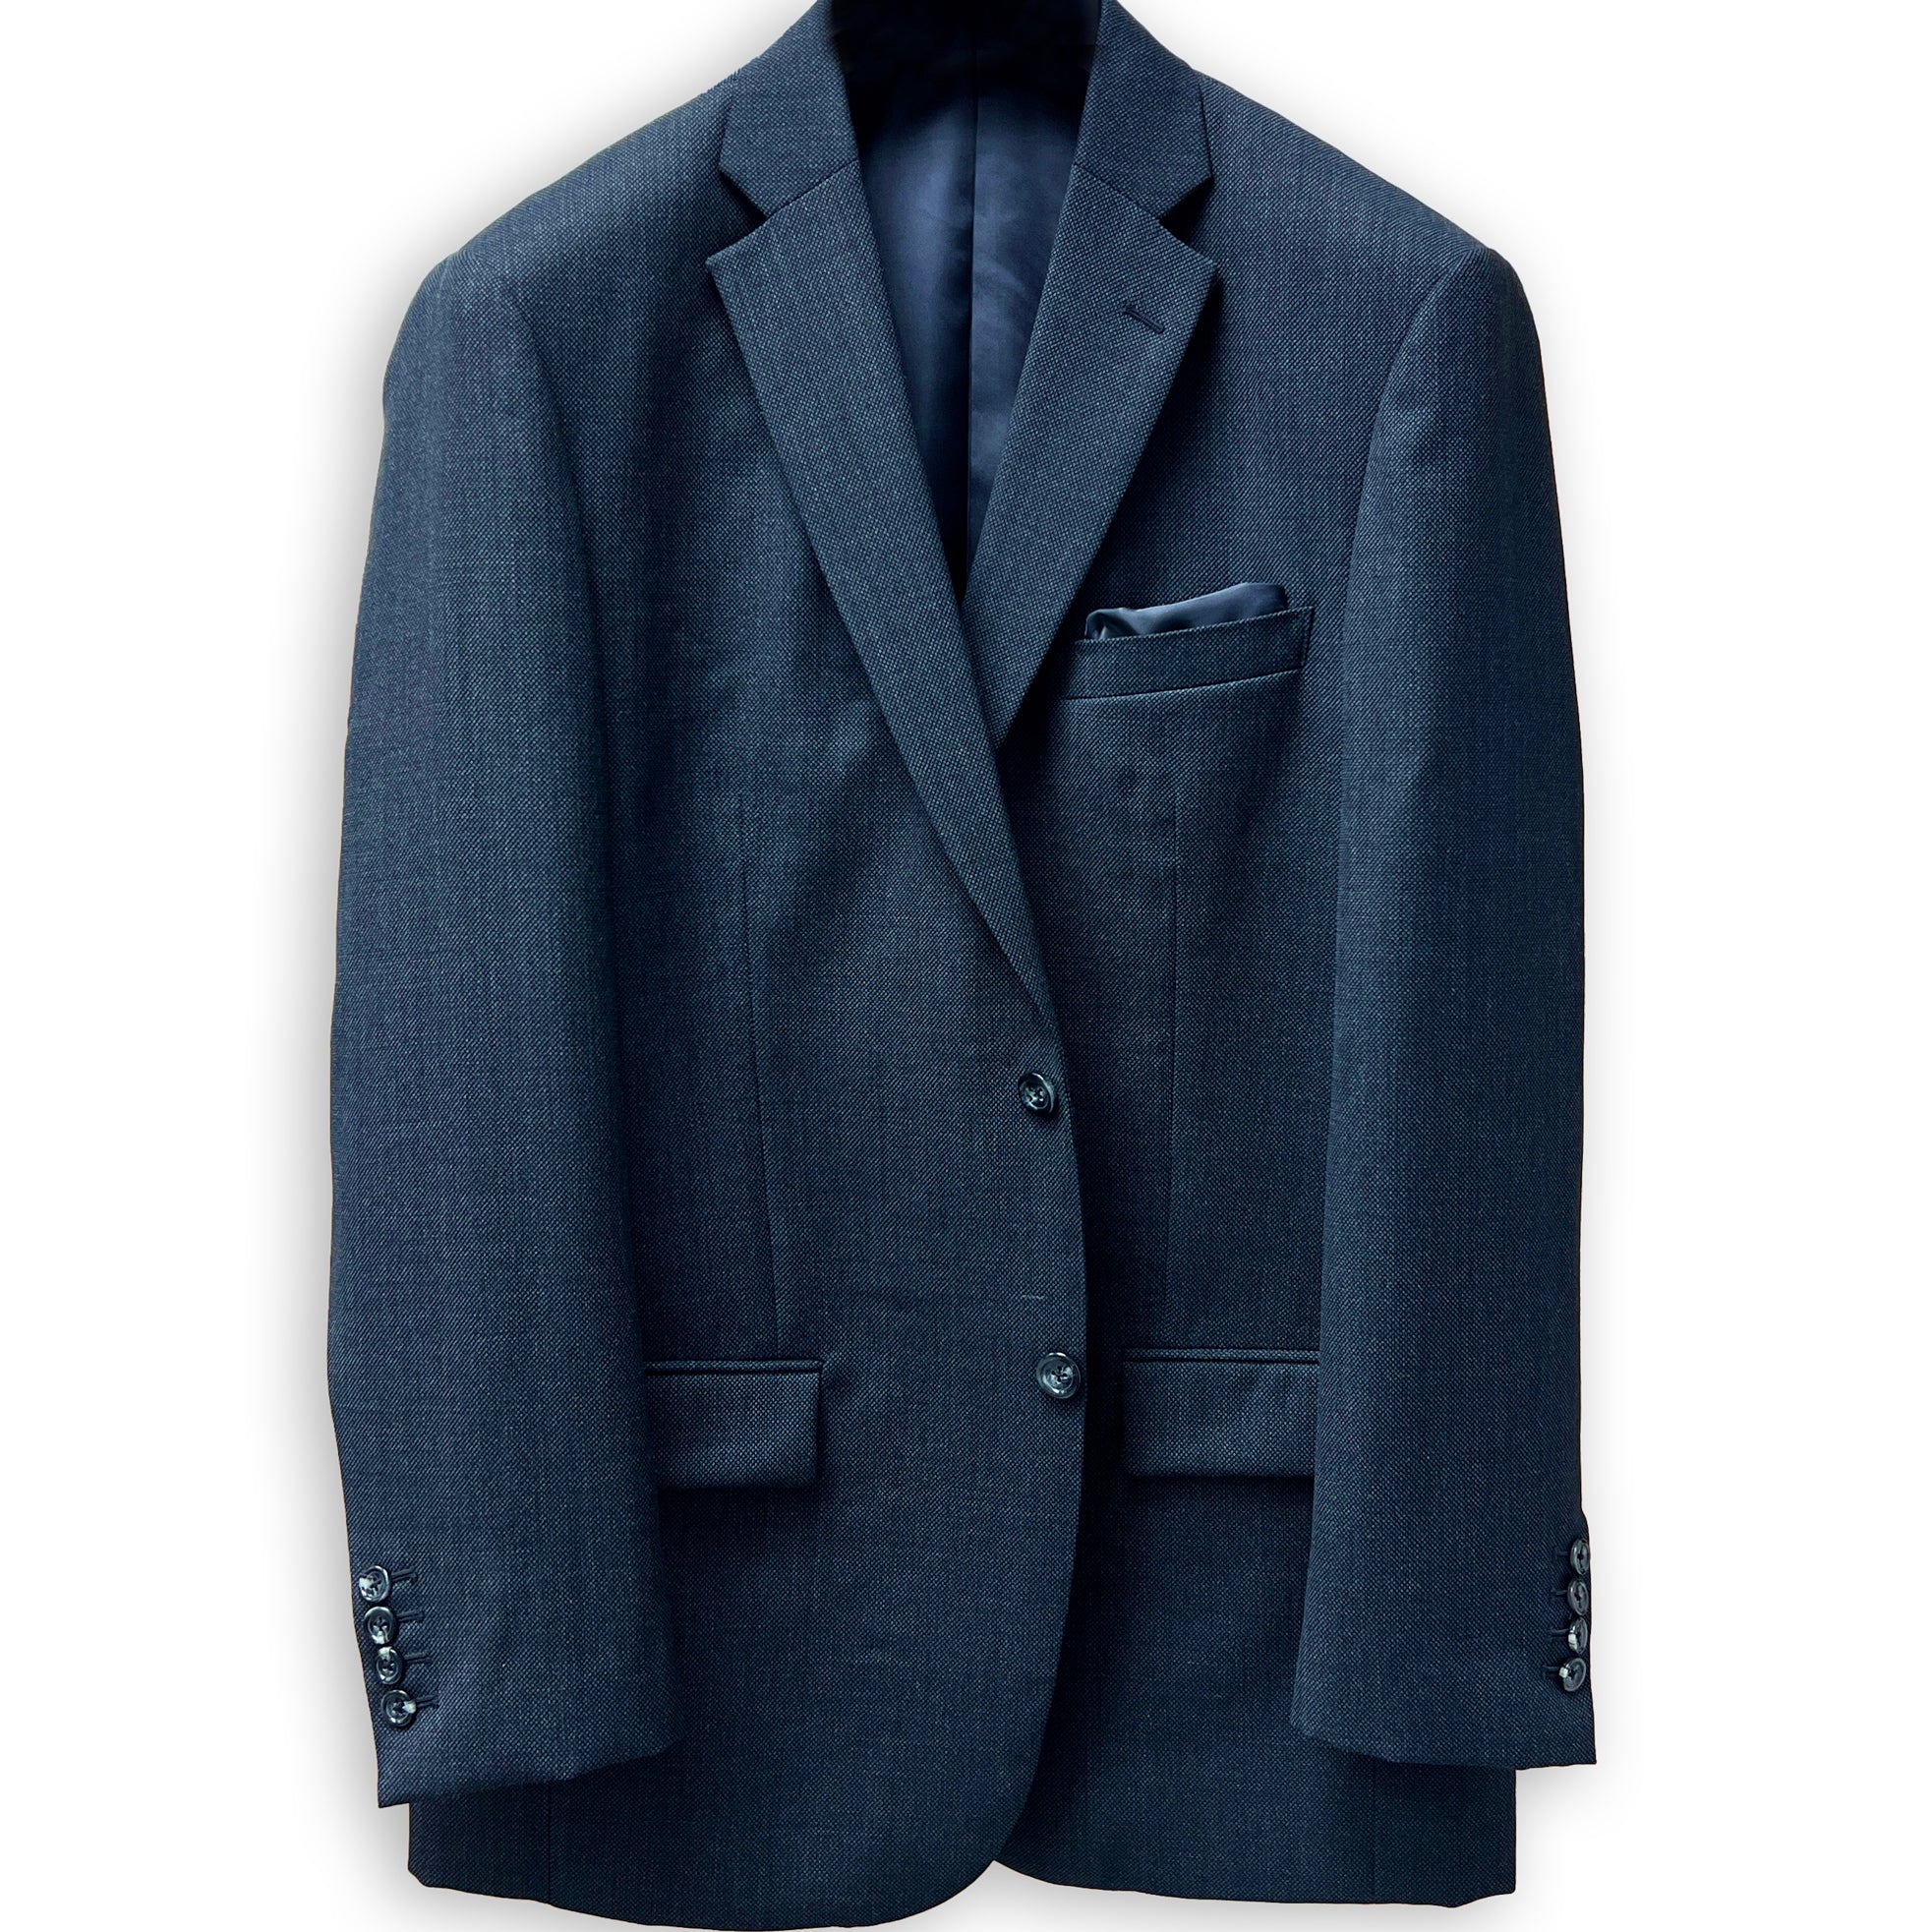 Men's online suit design featuring dark grey birdseye fabric, with a focus on the jacket's inner lining